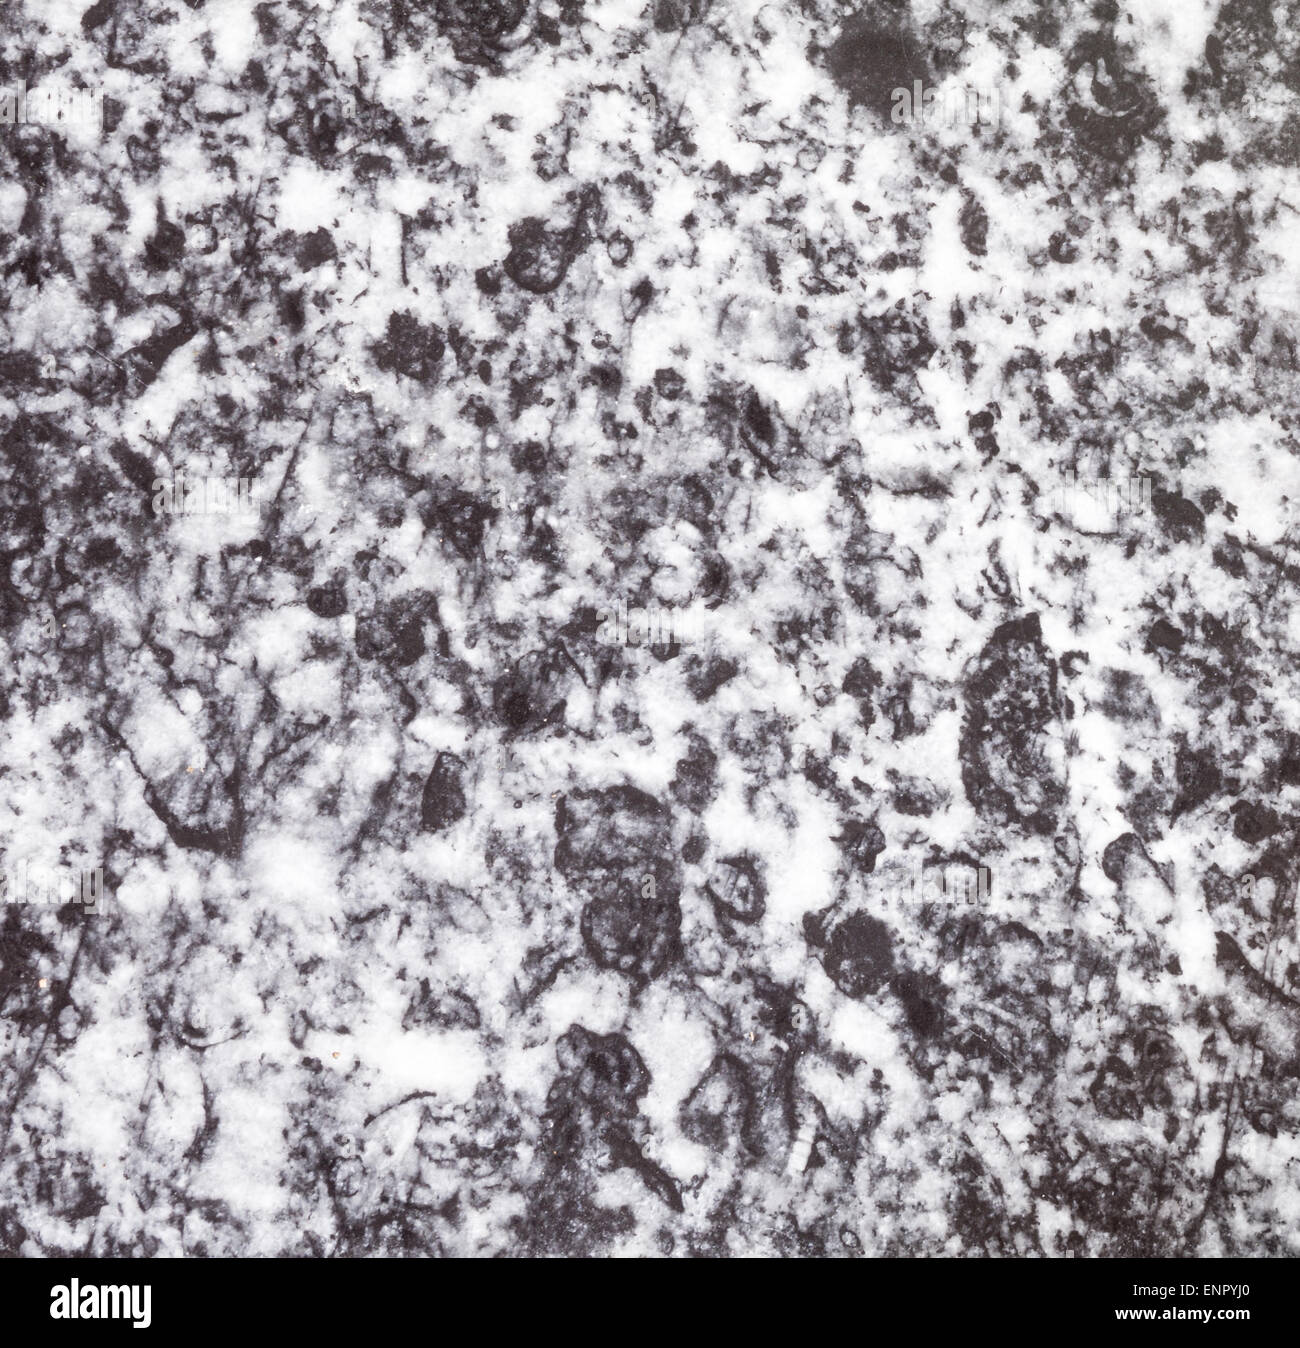 Black and White Marble Texture in Bathroom Stock Photo